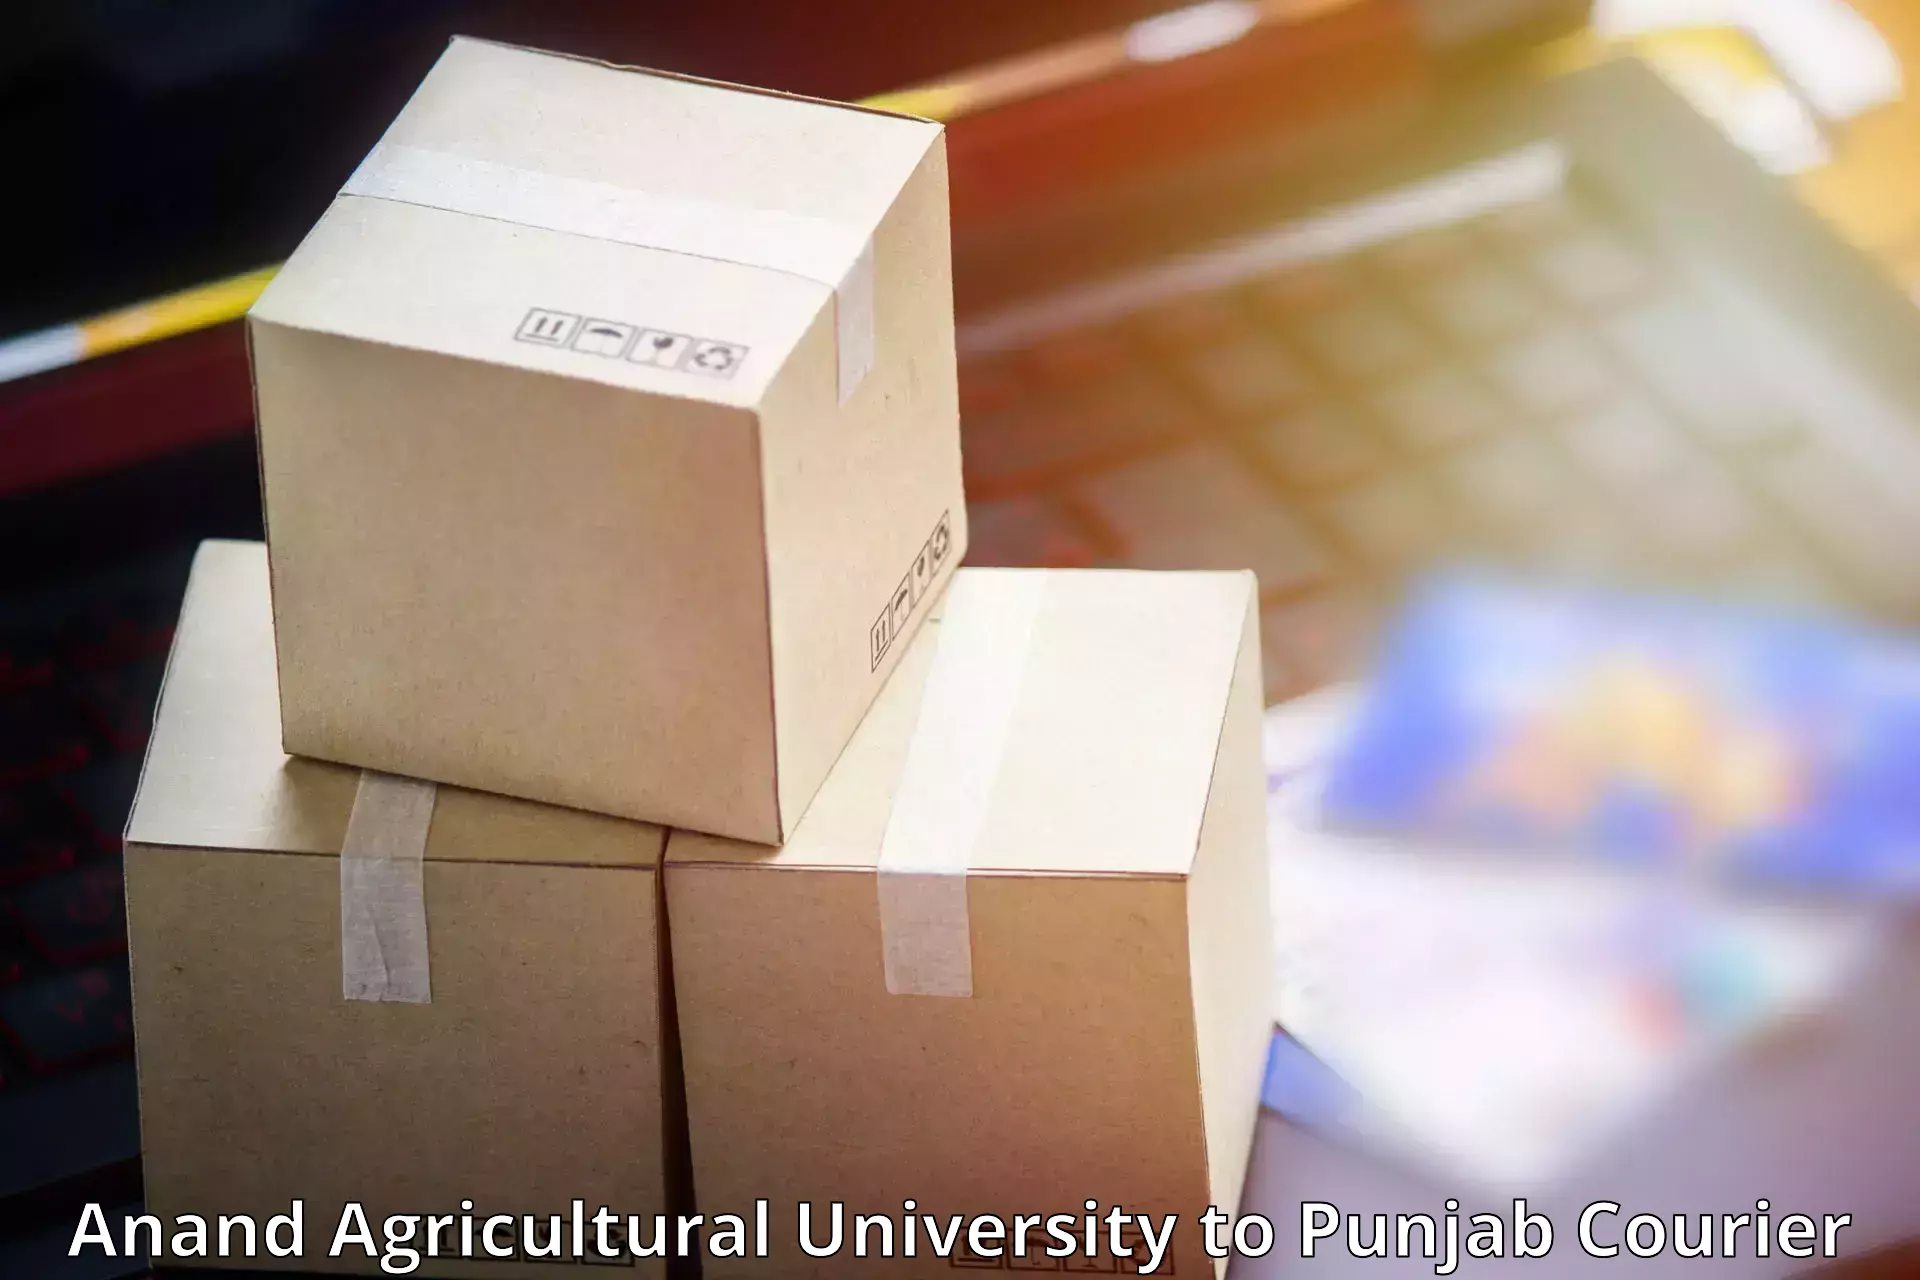 Optimized shipping services Anand Agricultural University to Talwara